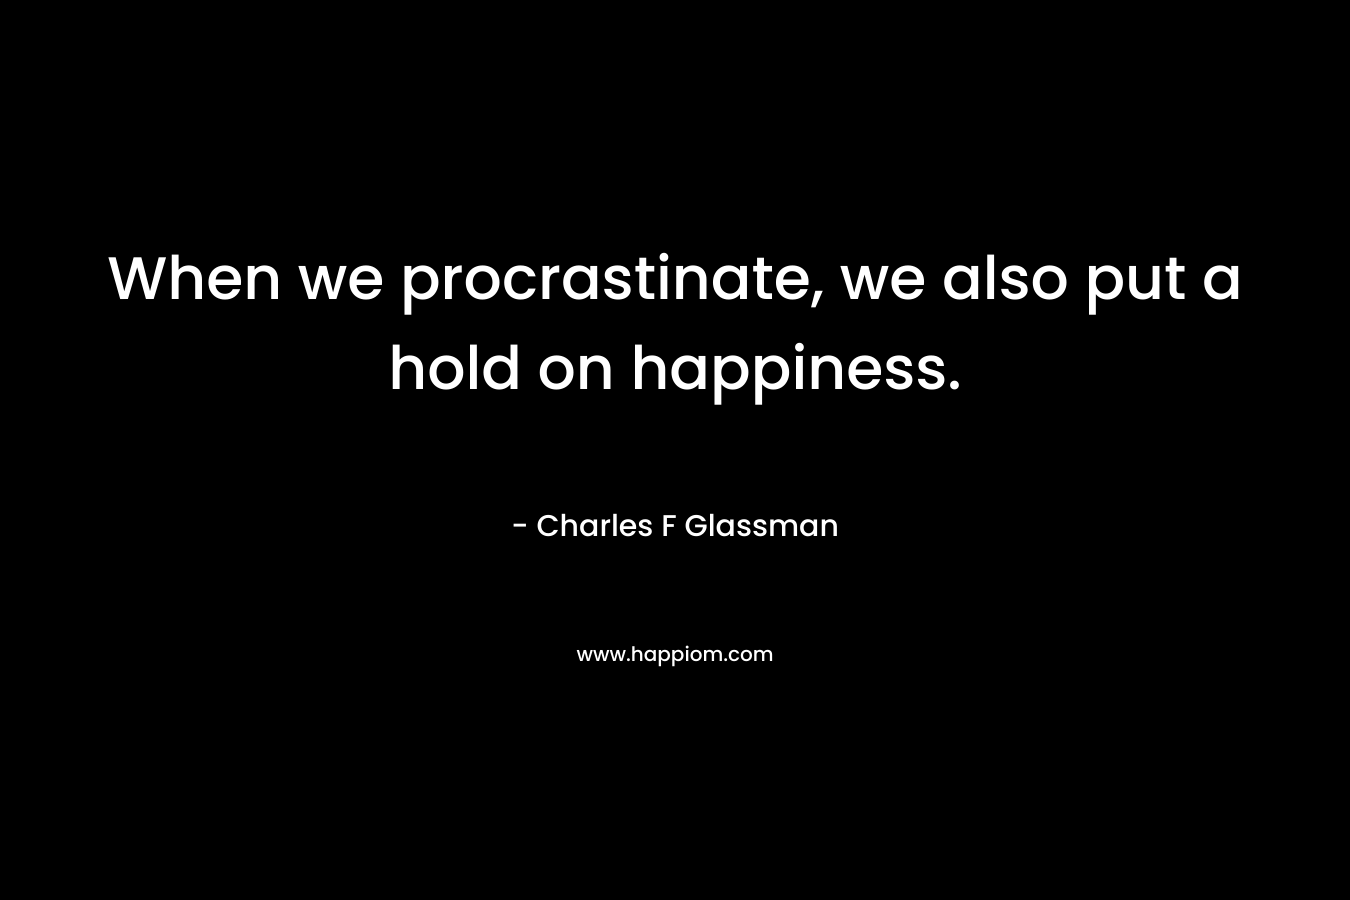 When we procrastinate, we also put a hold on happiness. – Charles F Glassman